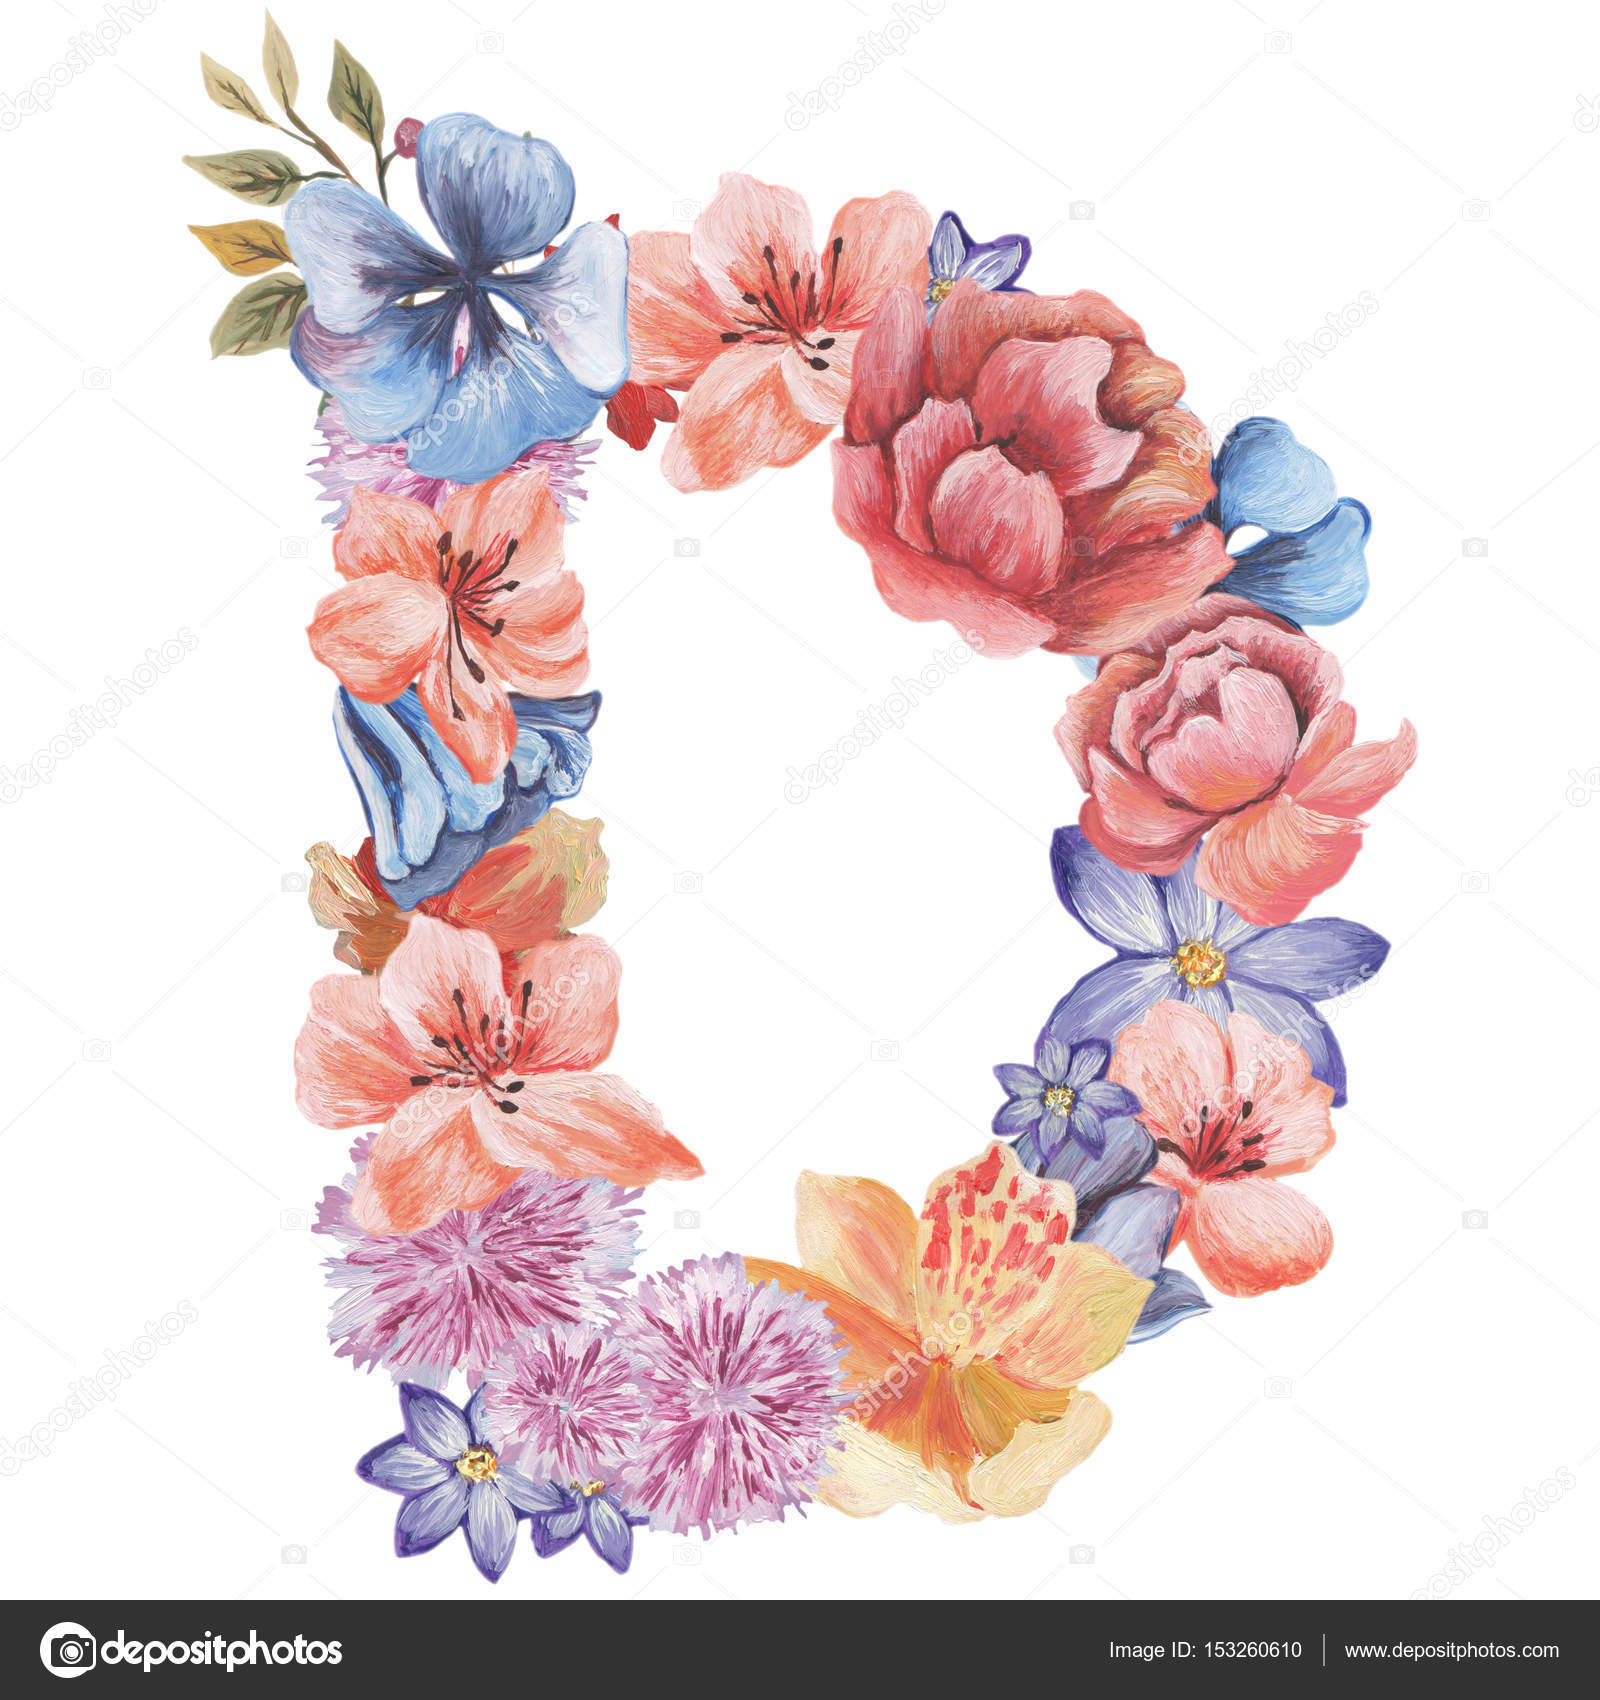 Letter D Of Watercolor Flowers Isolated Hand Drawn On A White